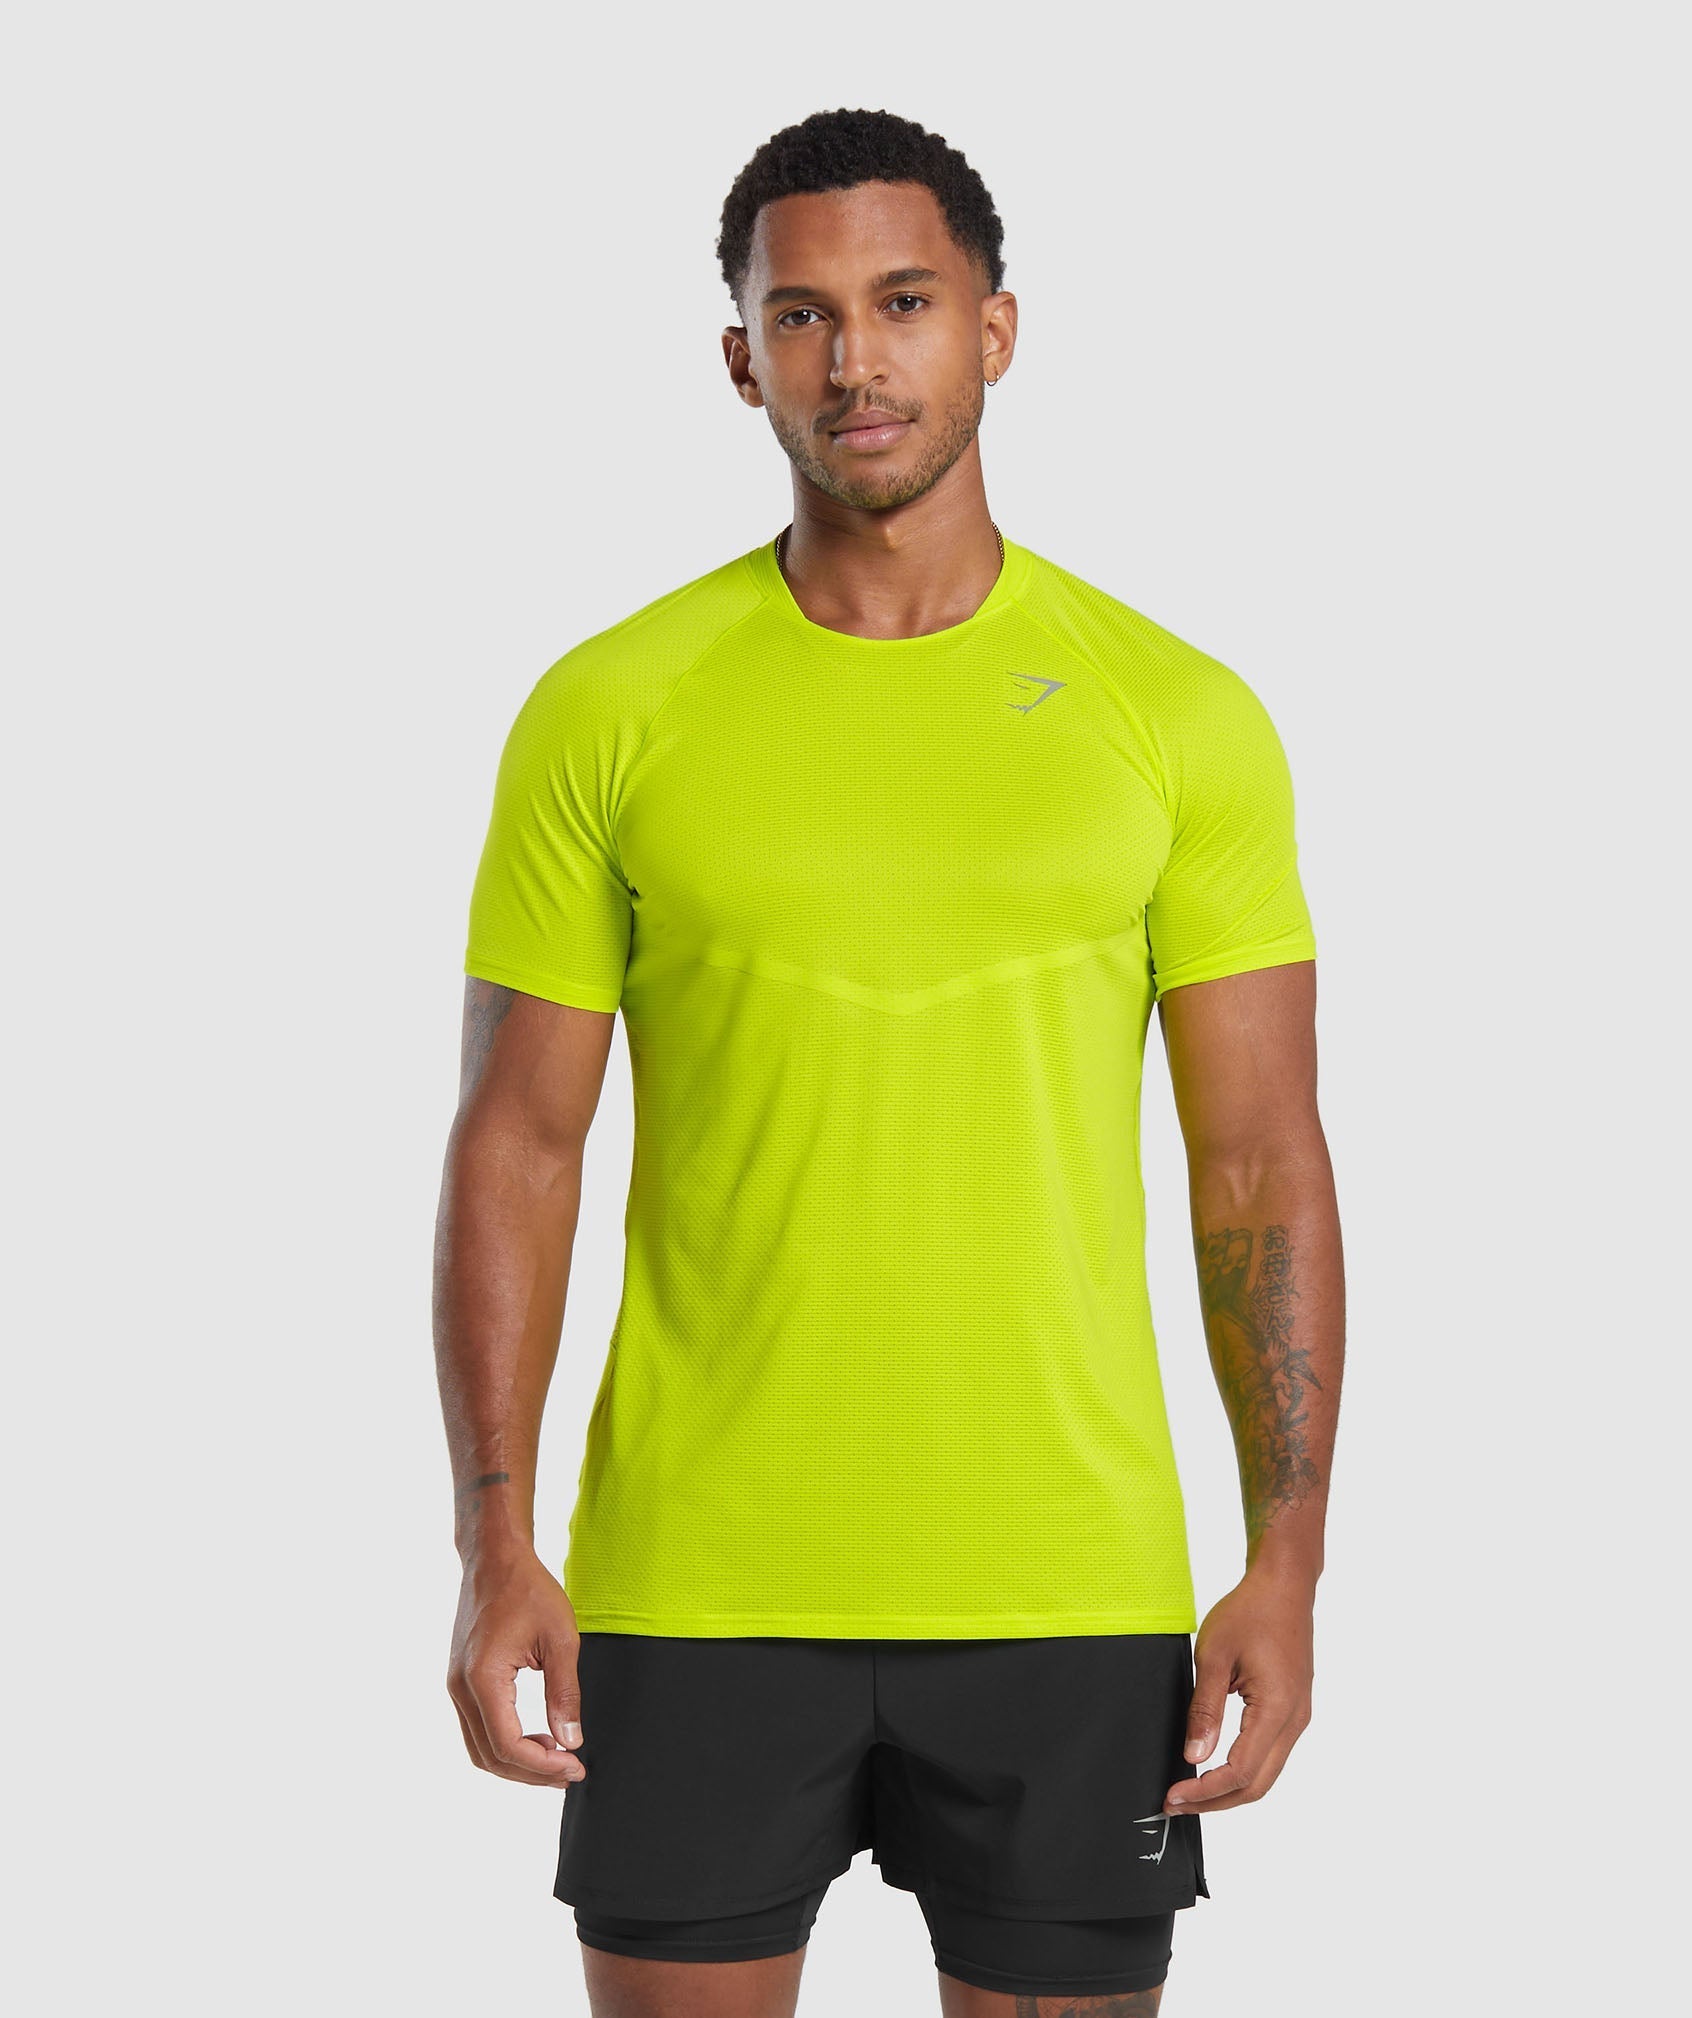 Speed T-Shirt in Fluo Speed Green - view 1